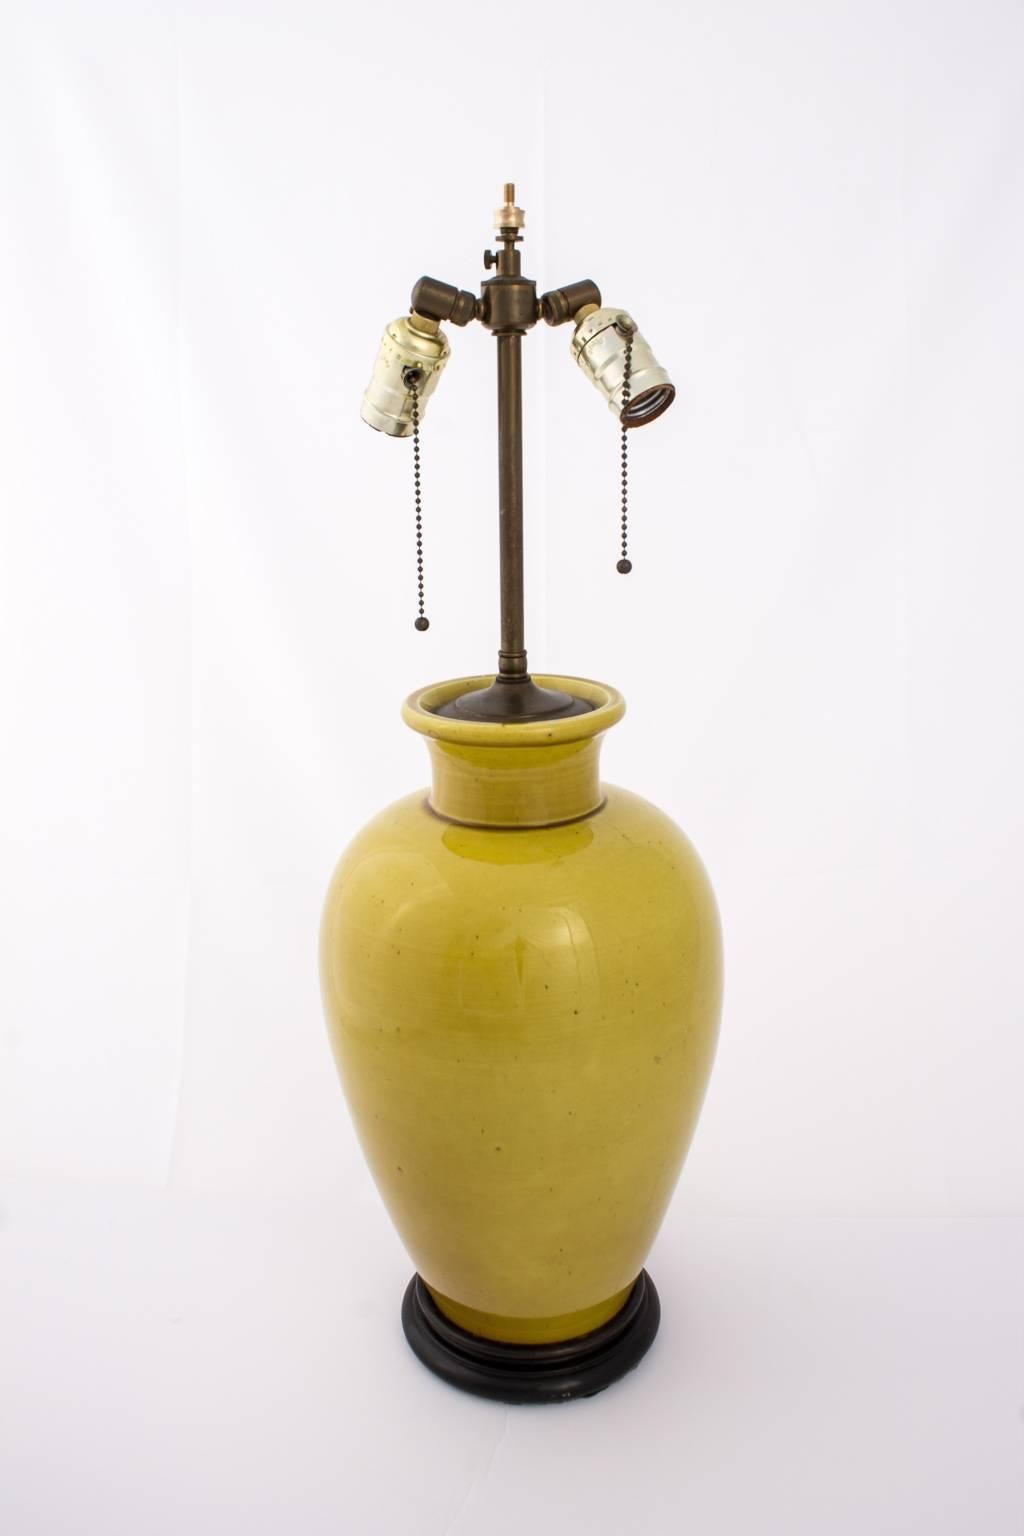 Mellon shaped Chinese ceramic table lamp with crackled glaze finish.